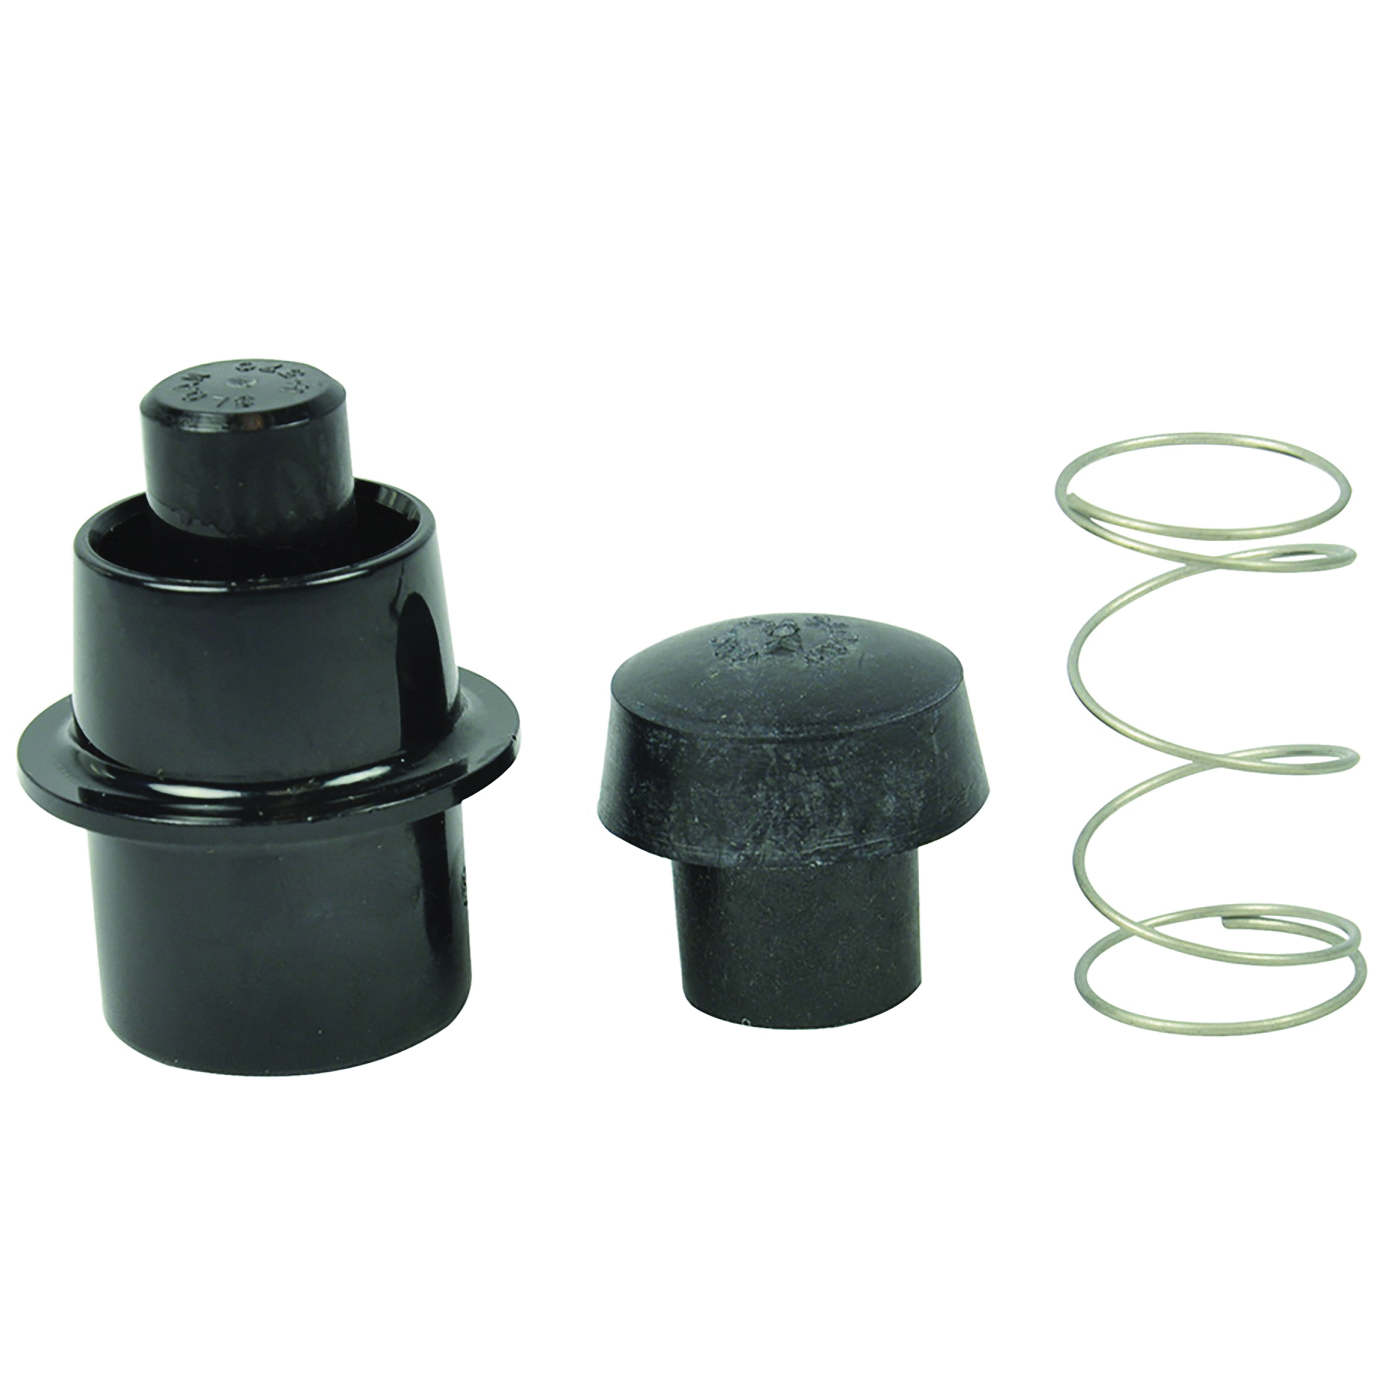 37056 Stop Repair Kit, For: Sloan H-543-ASD Rebuilds 3/4 in Screwdriver Stops H600-A, H600-AG, H540-A and H540-AG